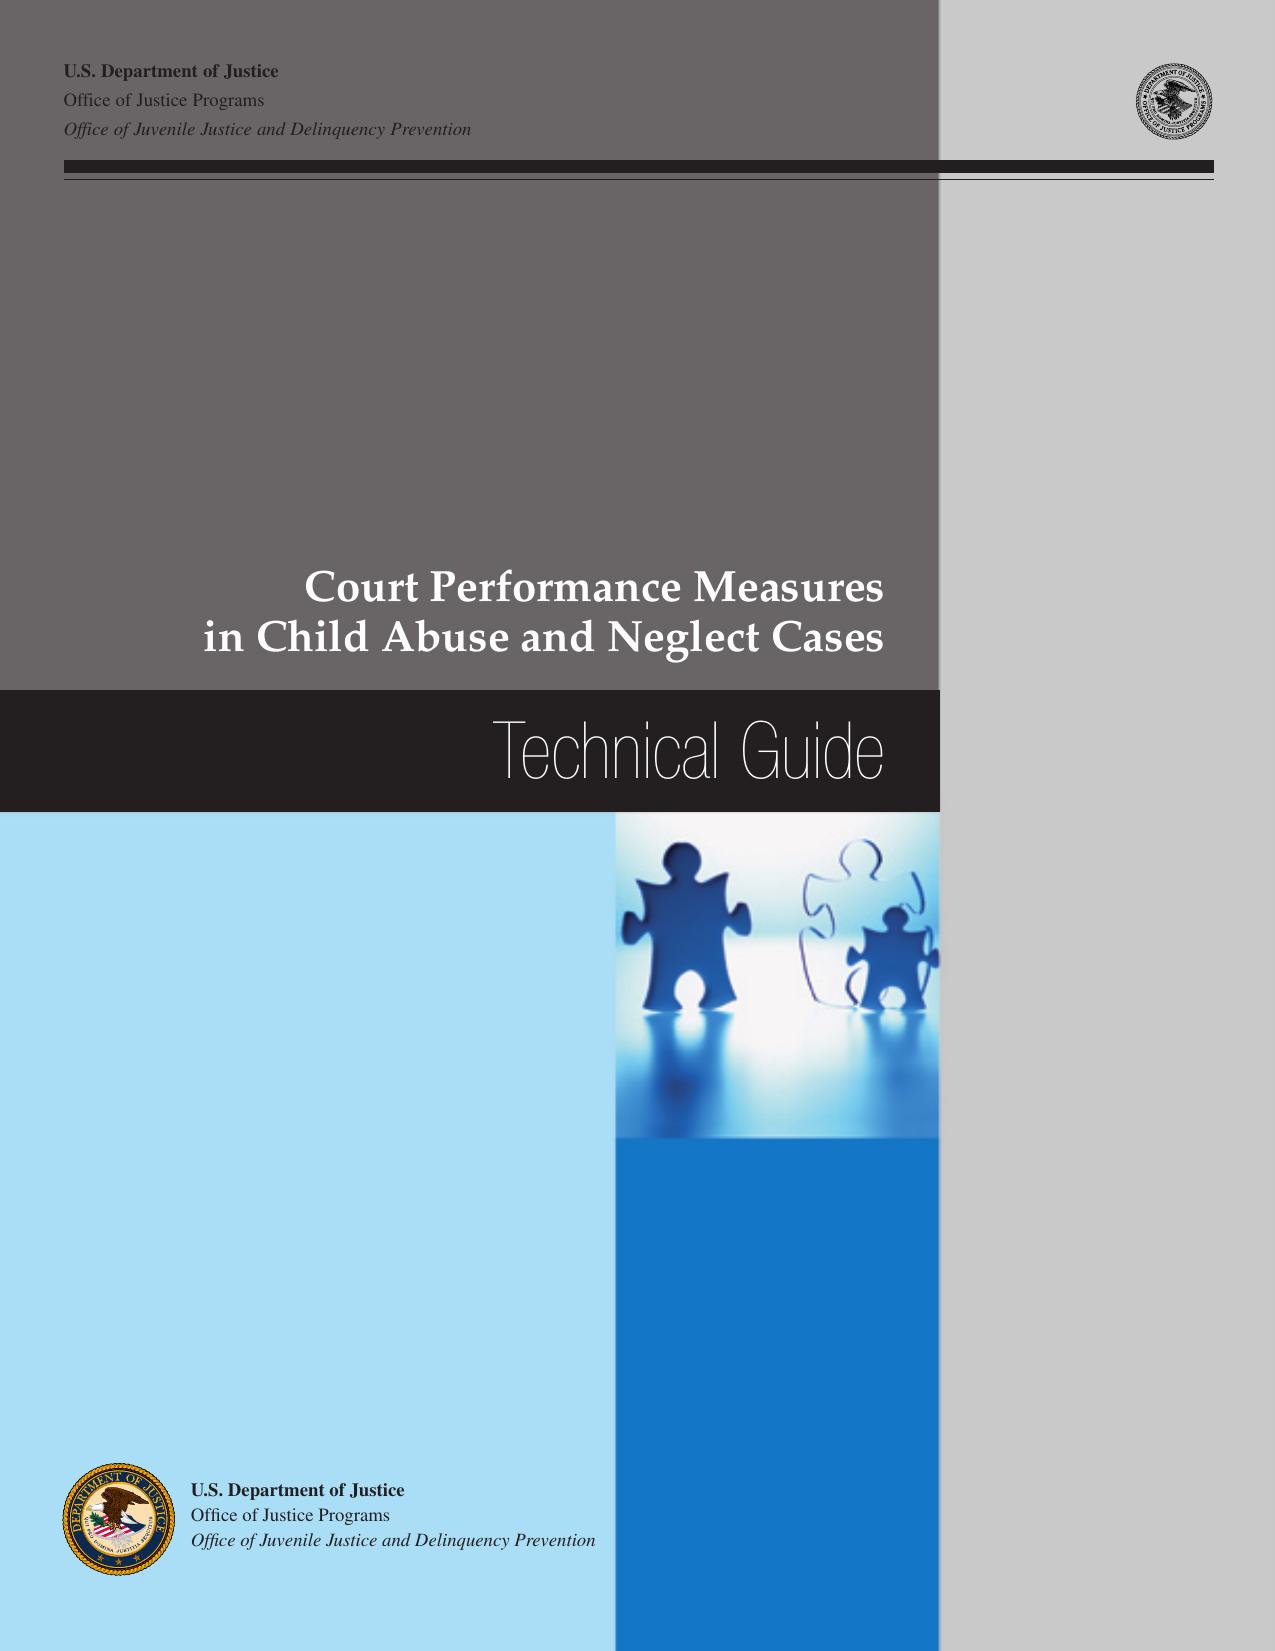 Court Performance Measures in Child Abuse and Neglect Cases: Technical Guide